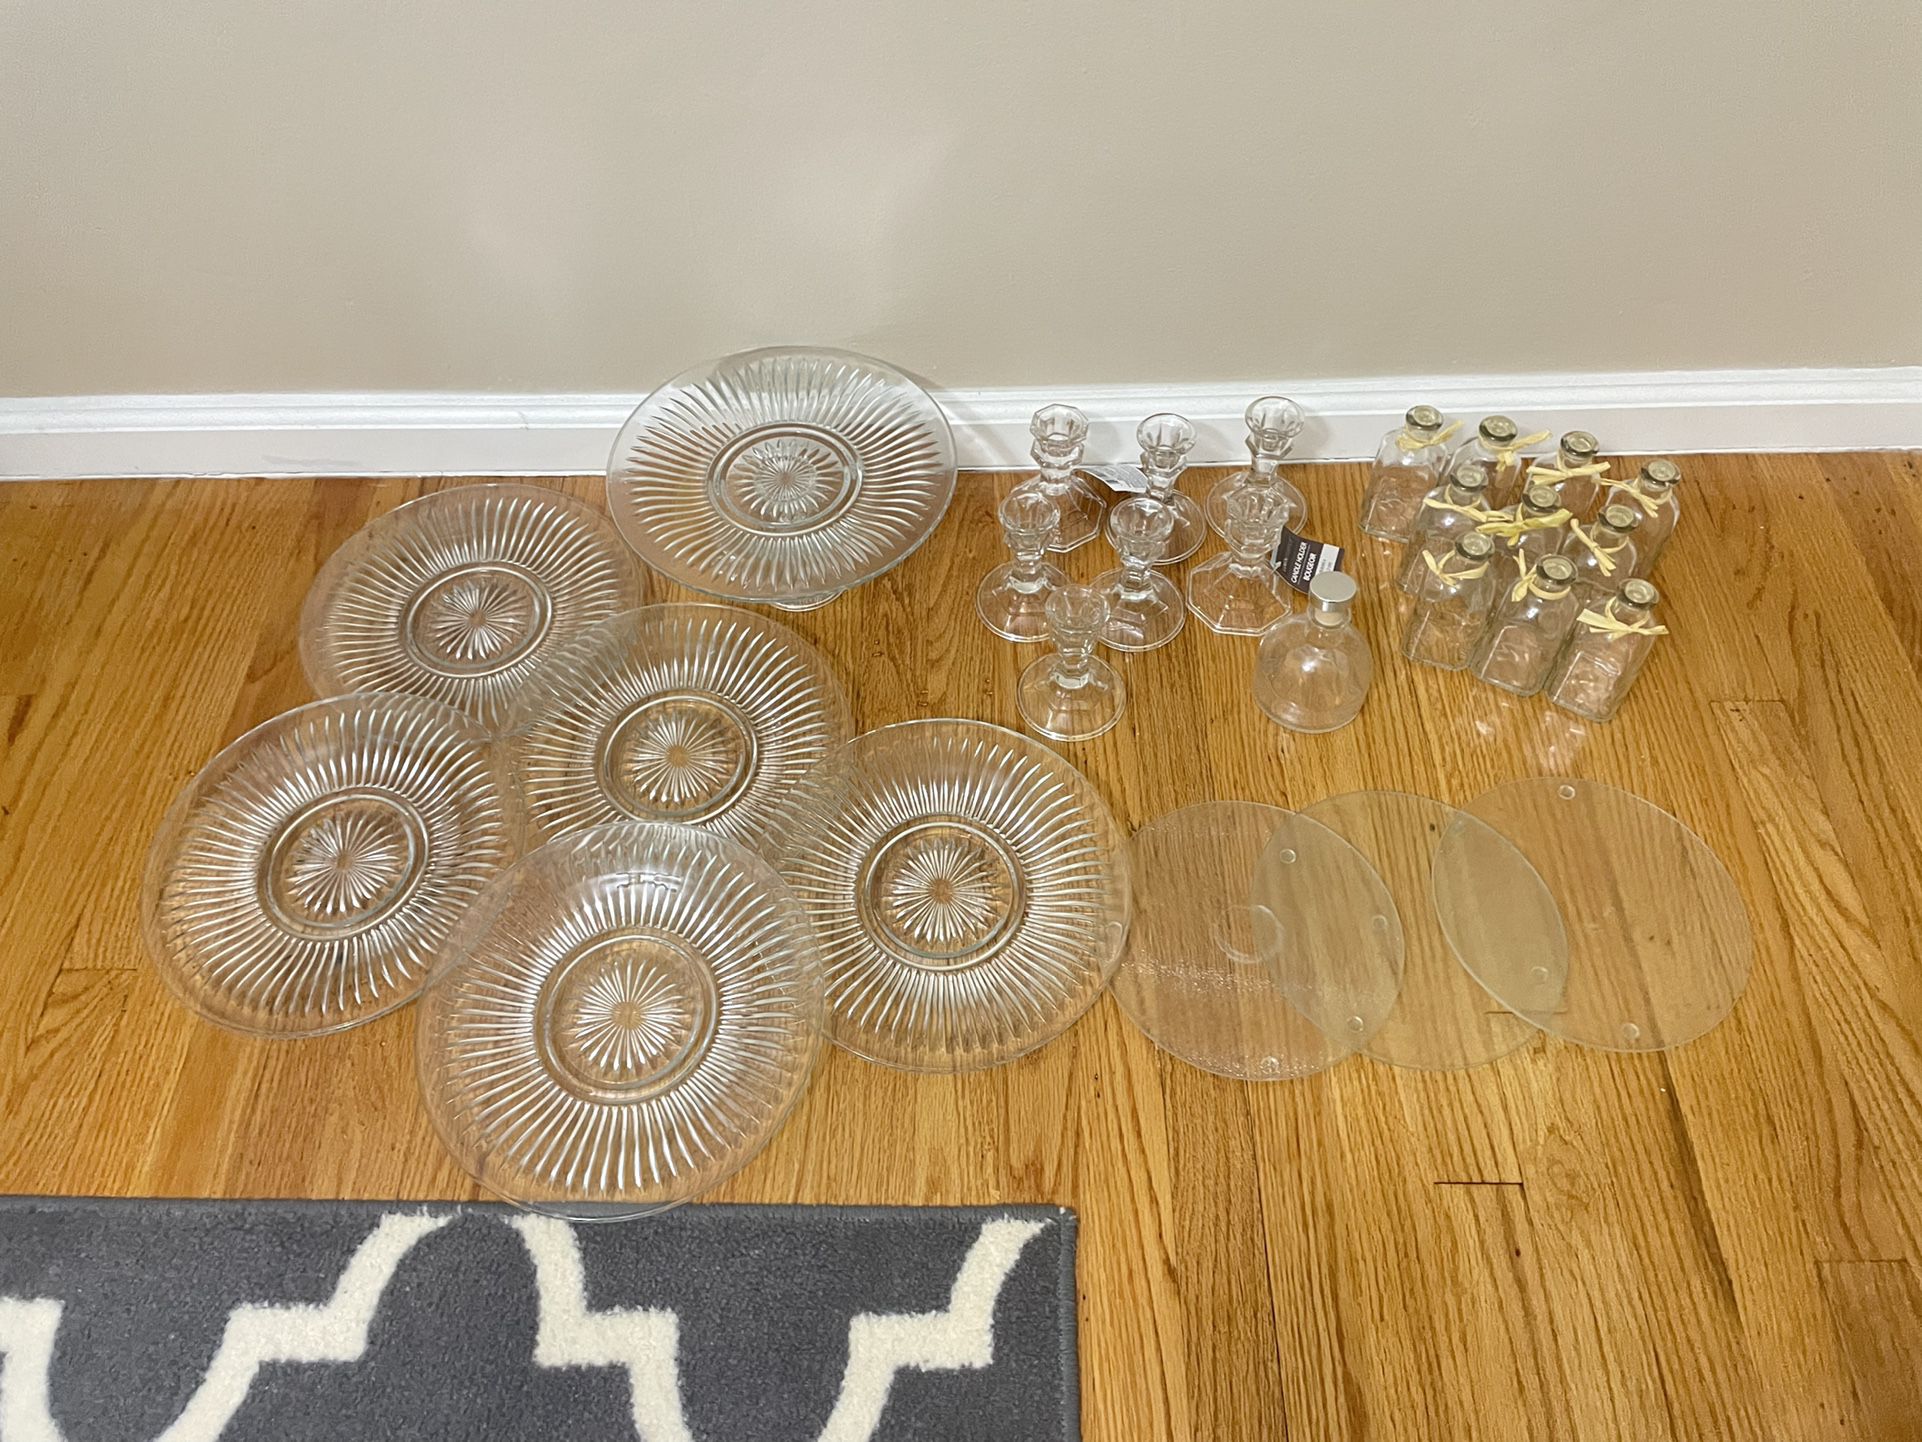 Wedding Decorations - Glass Plates, Glass Candle Holders, Small Vases